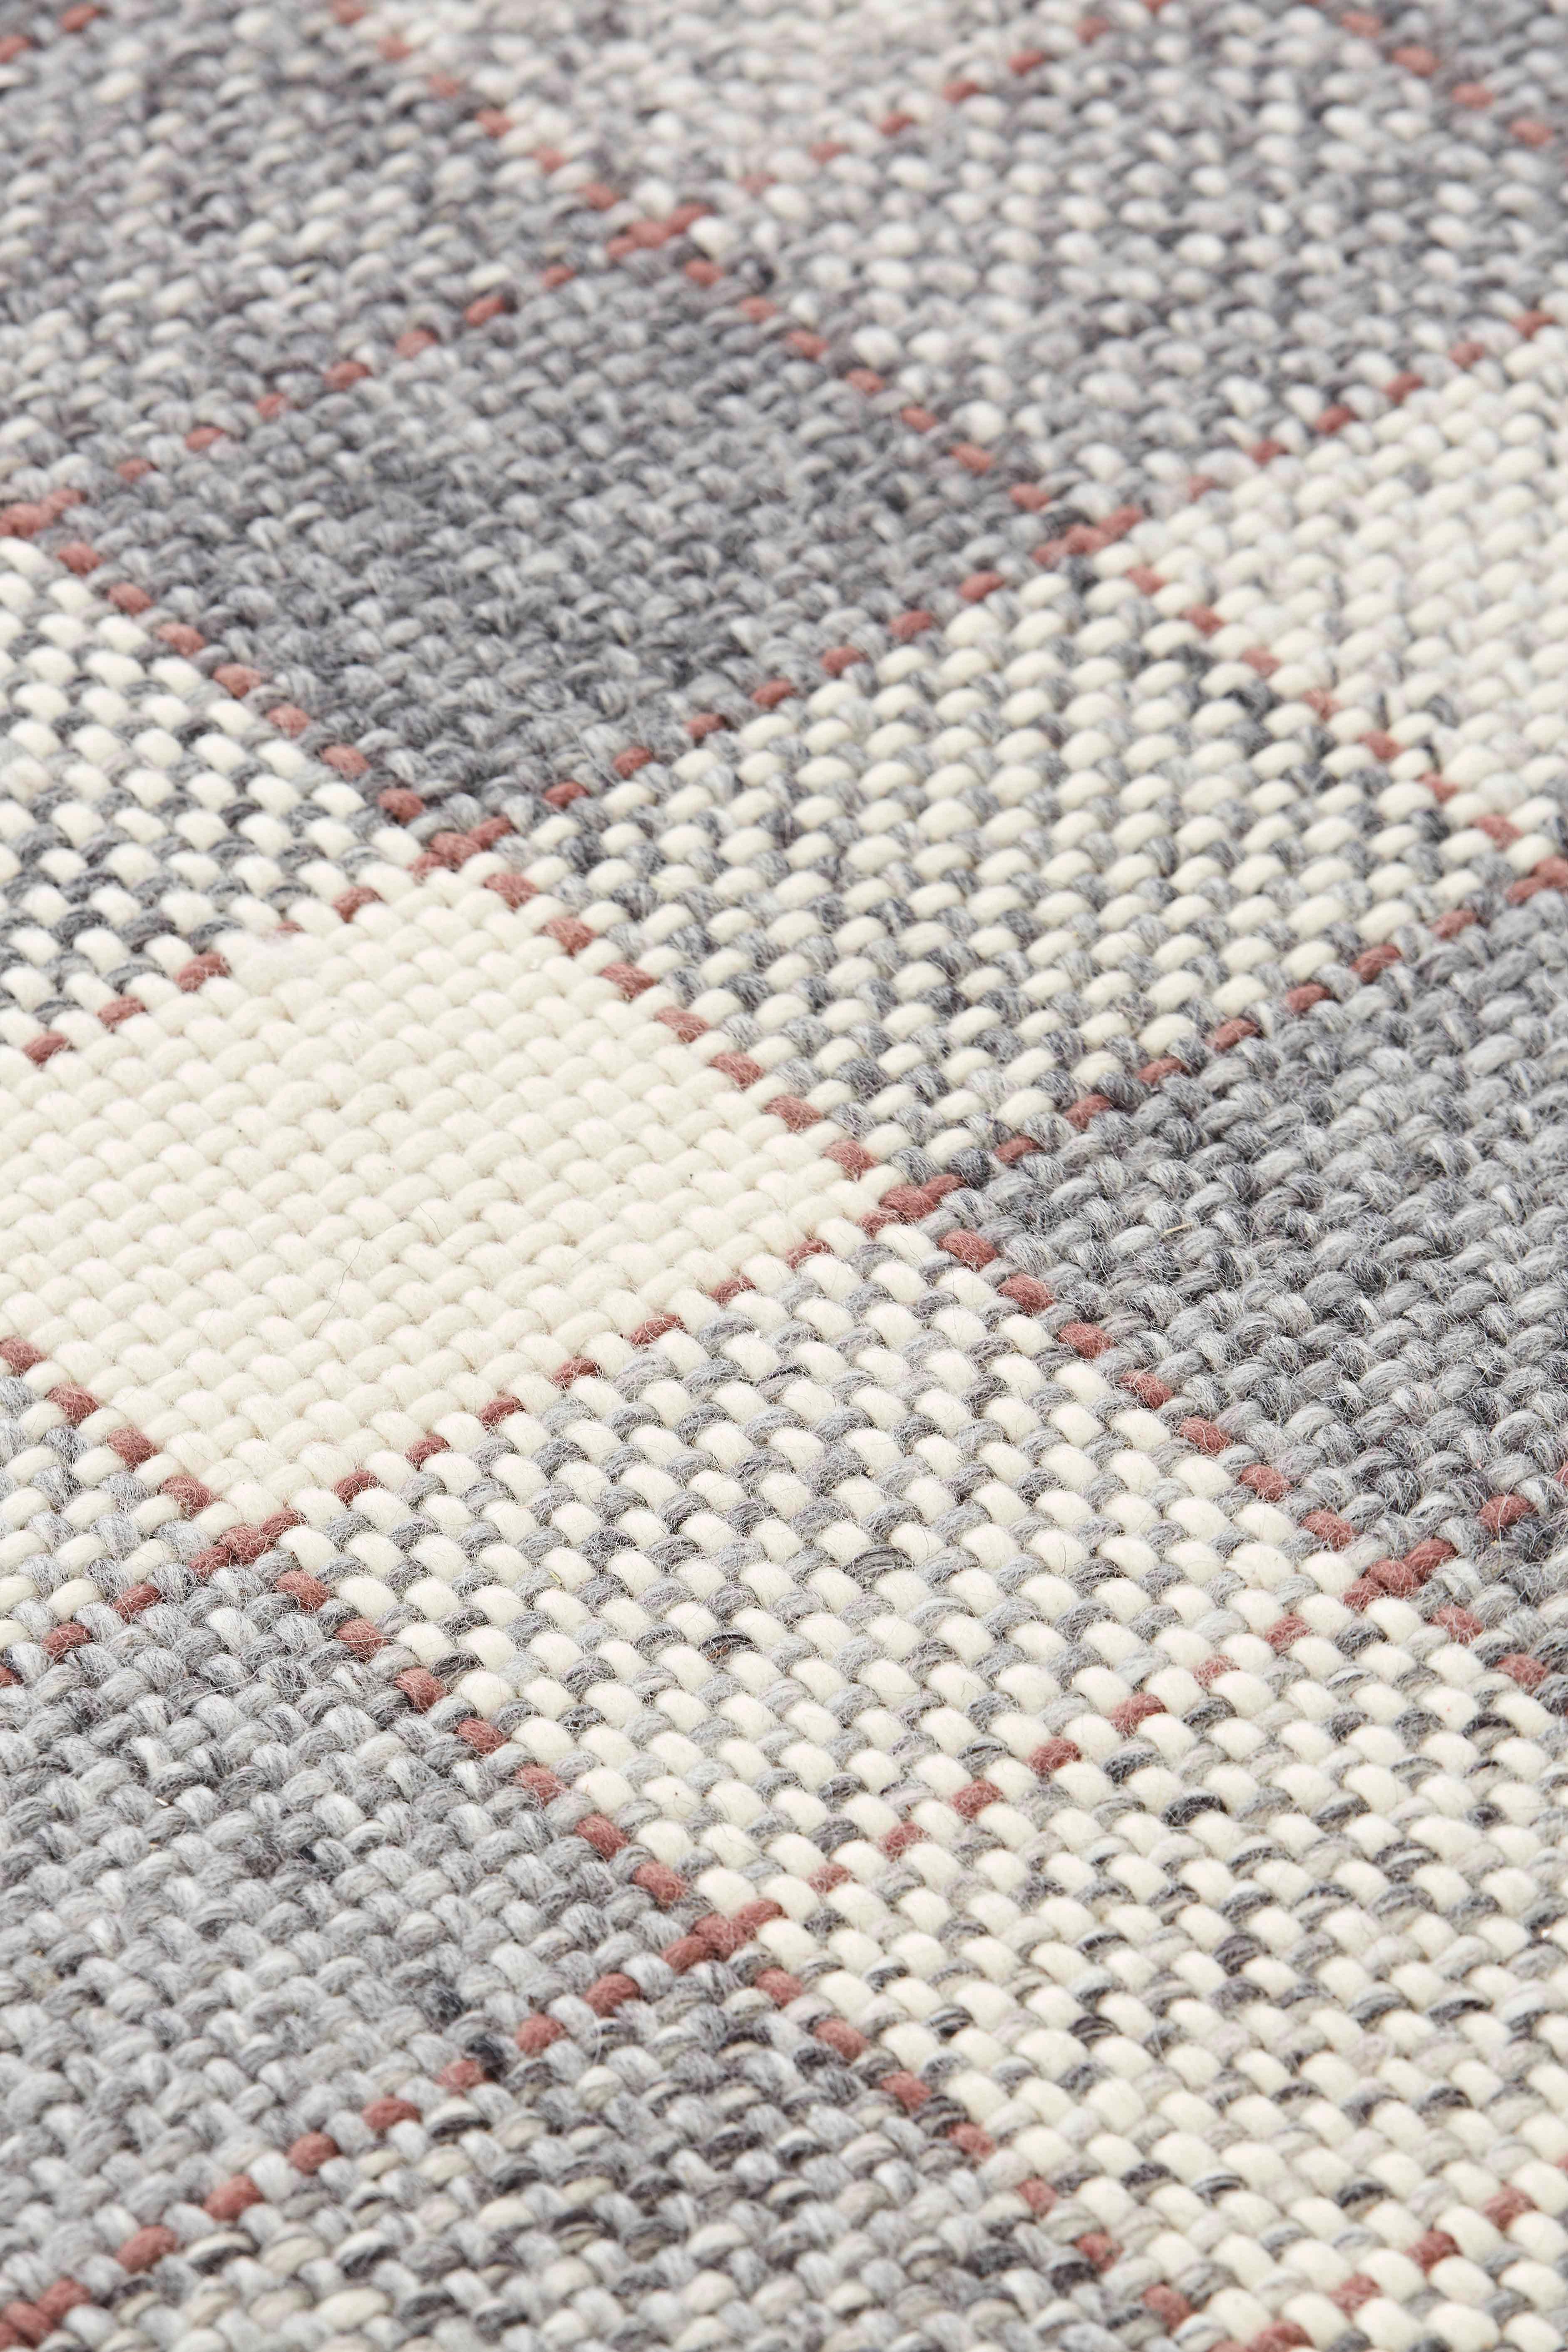 Neutral tones and warp and weft are the starts in this new collection, handwoven, from the GAN team. Cuadros plays with natural wool colors, flexible threads and a classic design, to create comfortable and calm spaces that work well in any